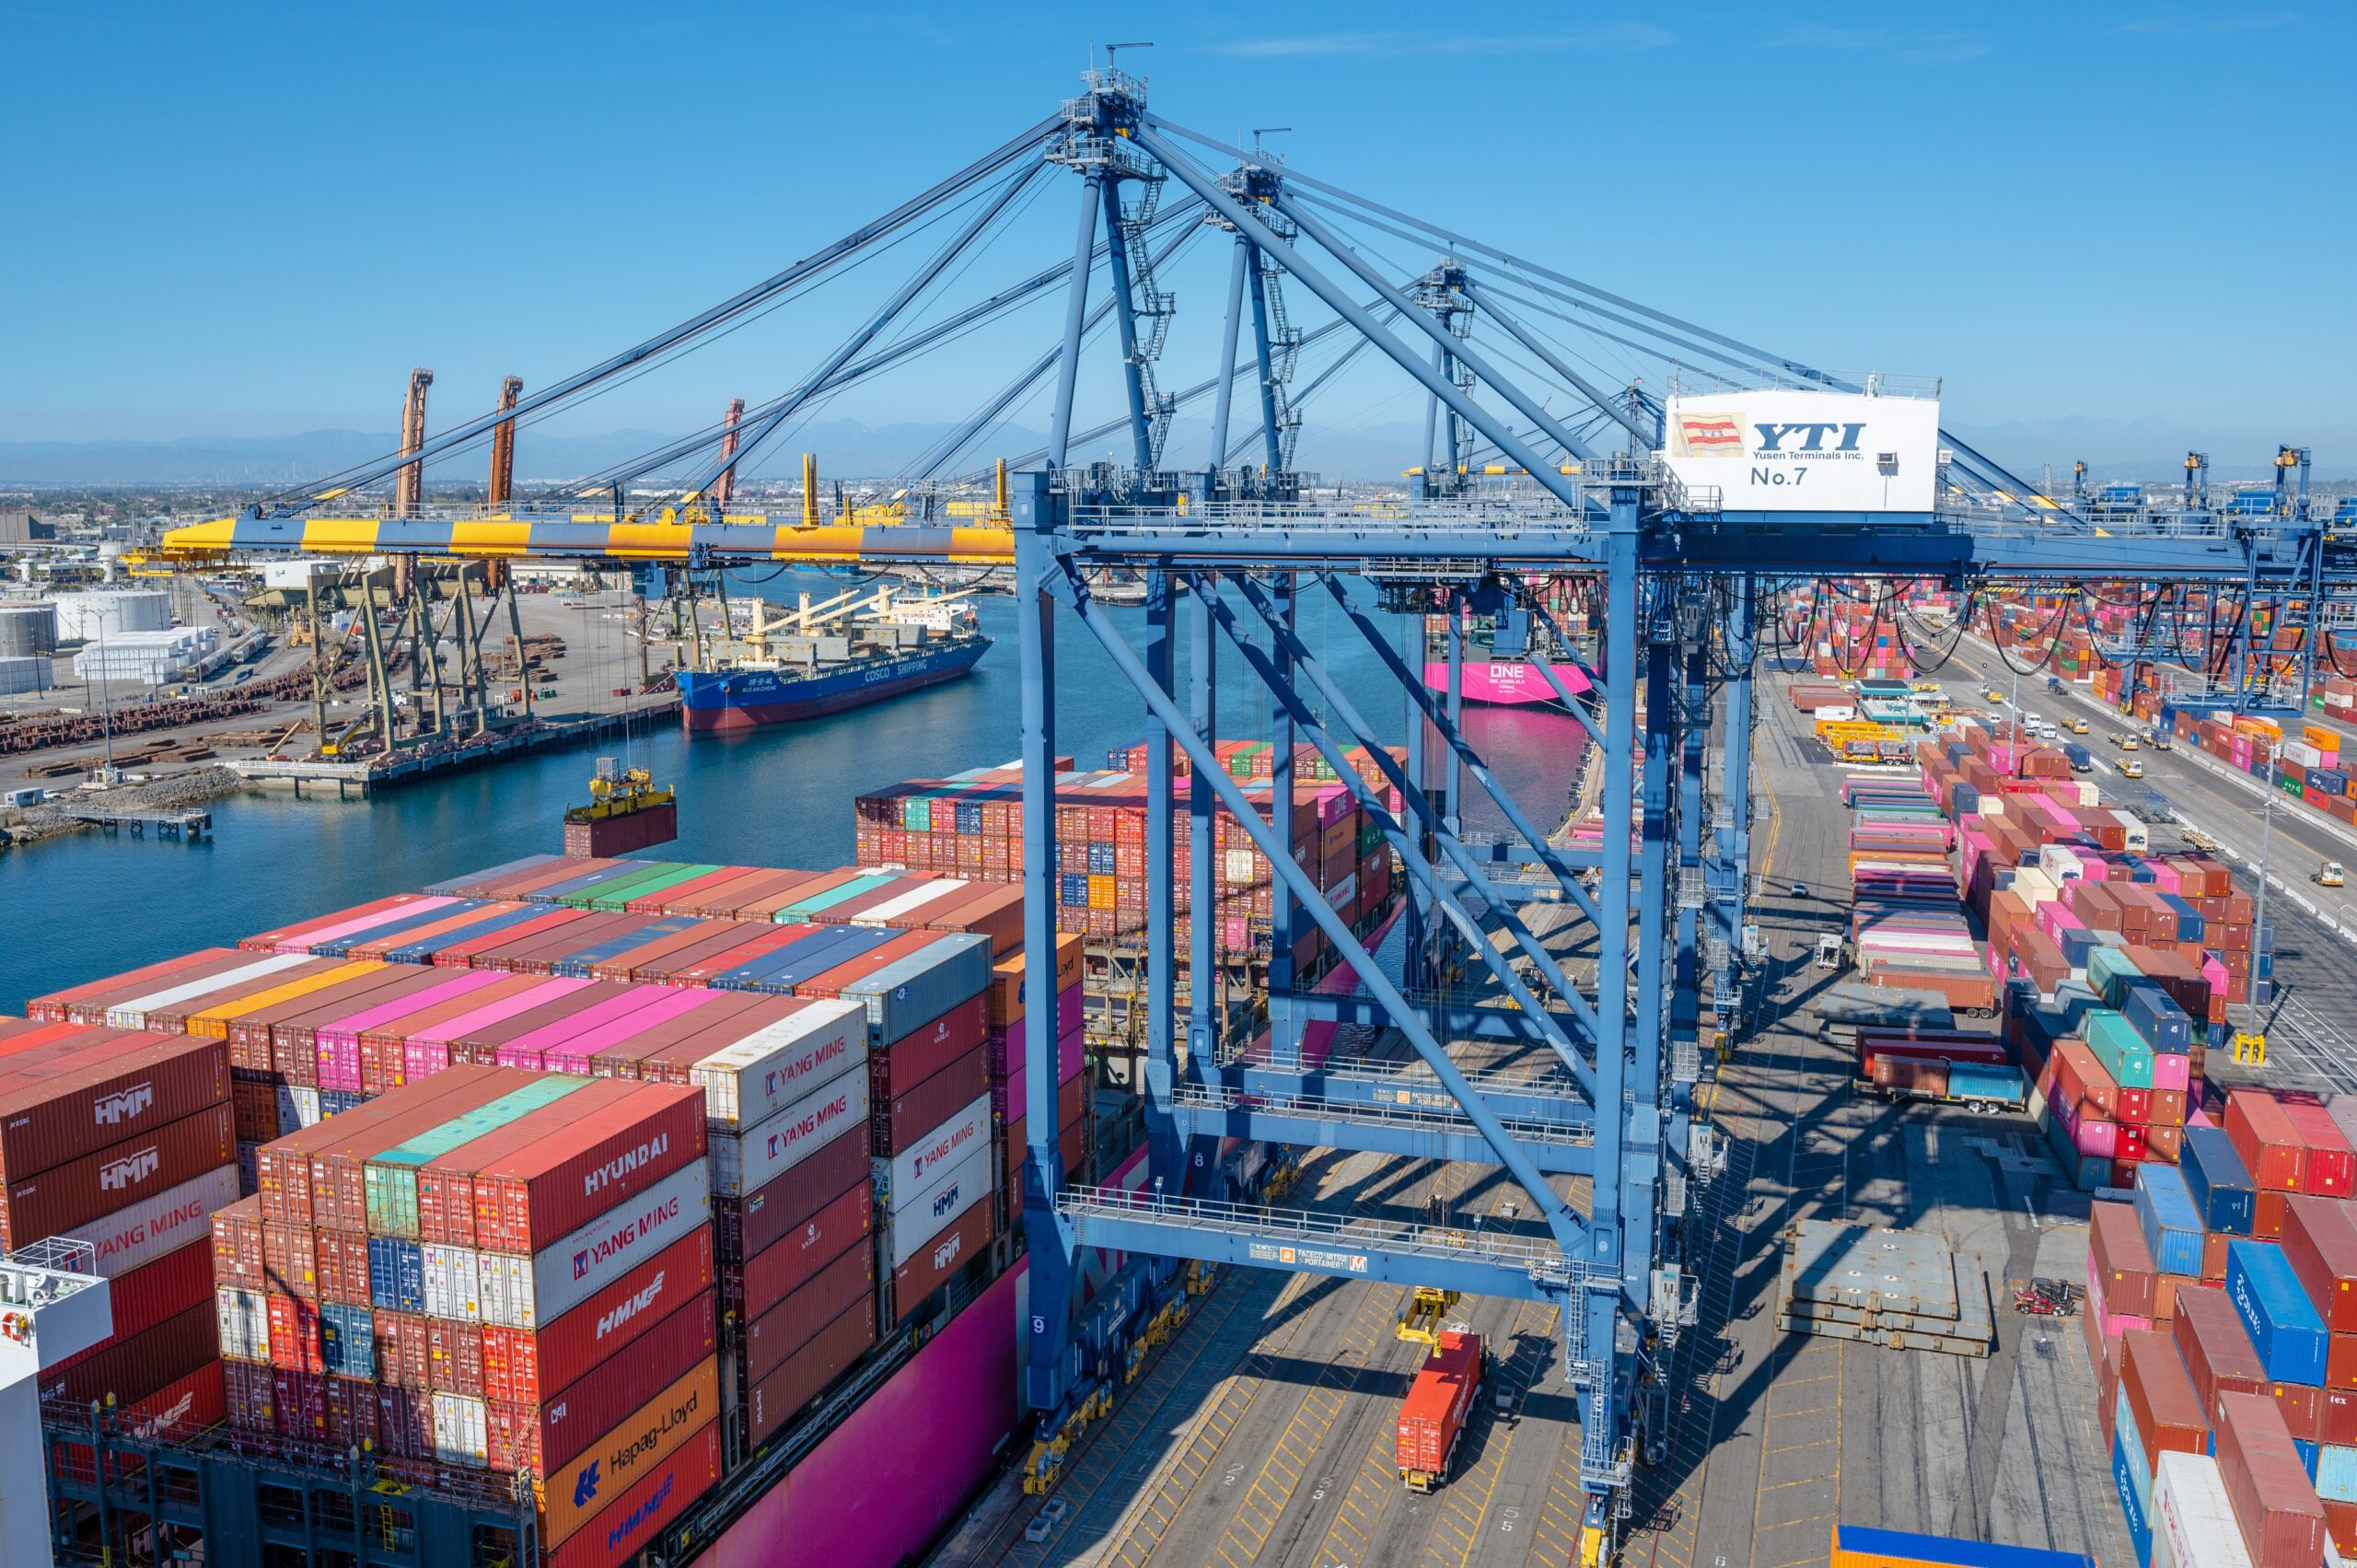 Container Volumes at Port of Los Angeles Rise for Second Straight Month, But Pace Lagging Pre-Pandemic